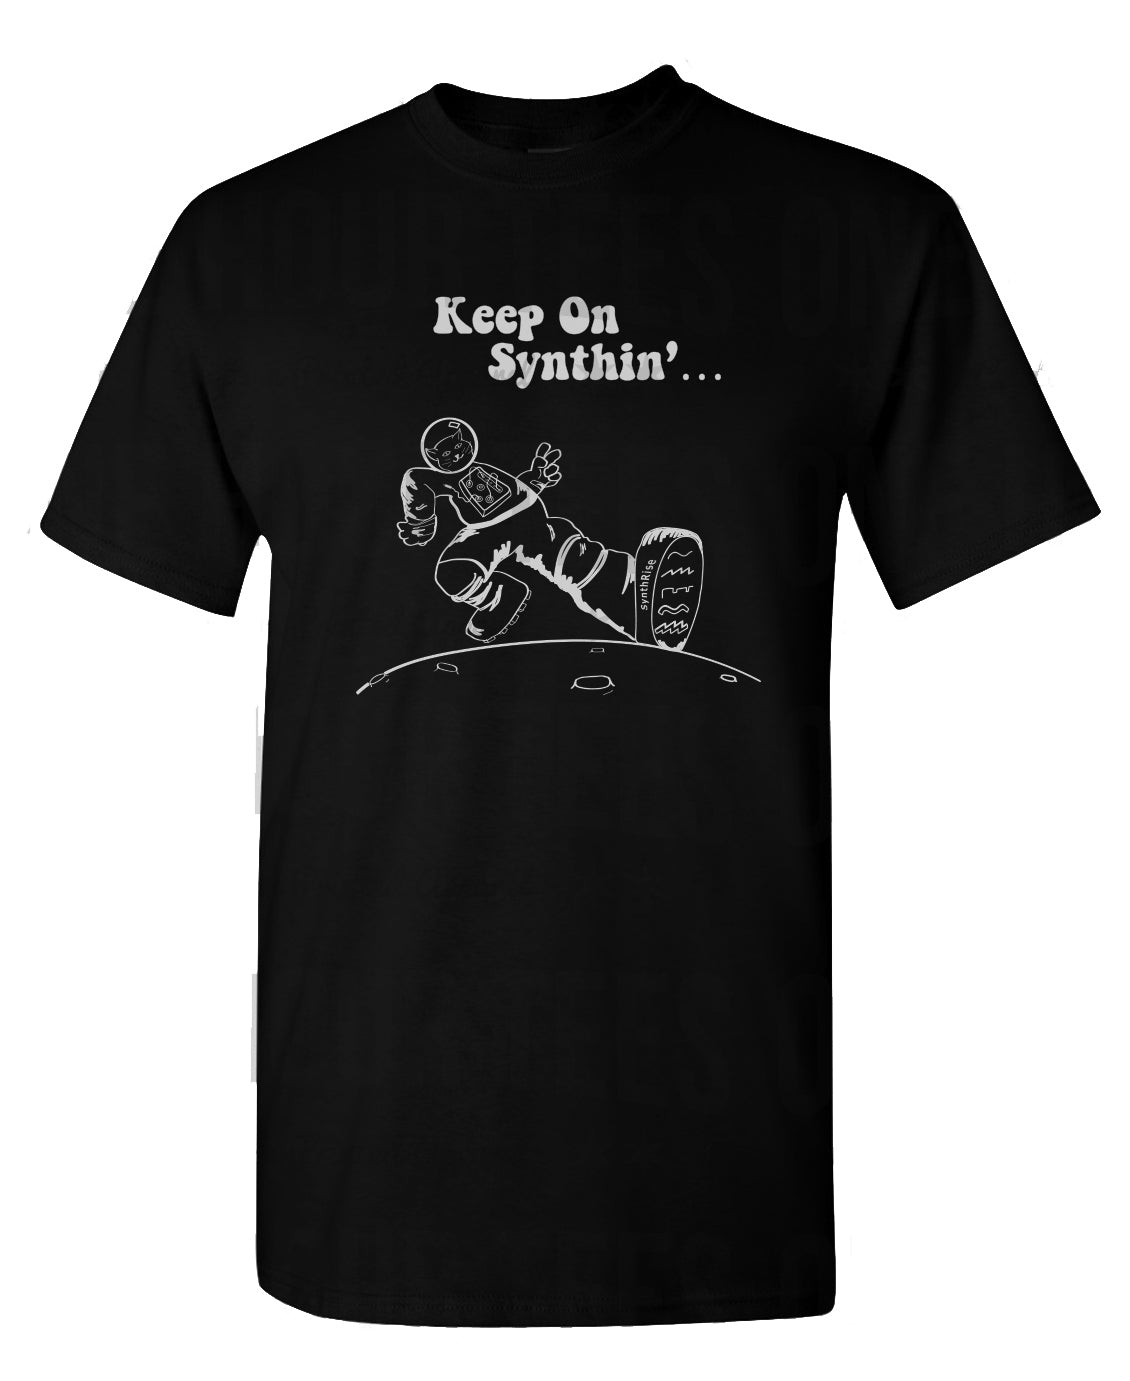 T-shirt with "Keep On Synthin'" and a cat astronaut strutting on the moon.